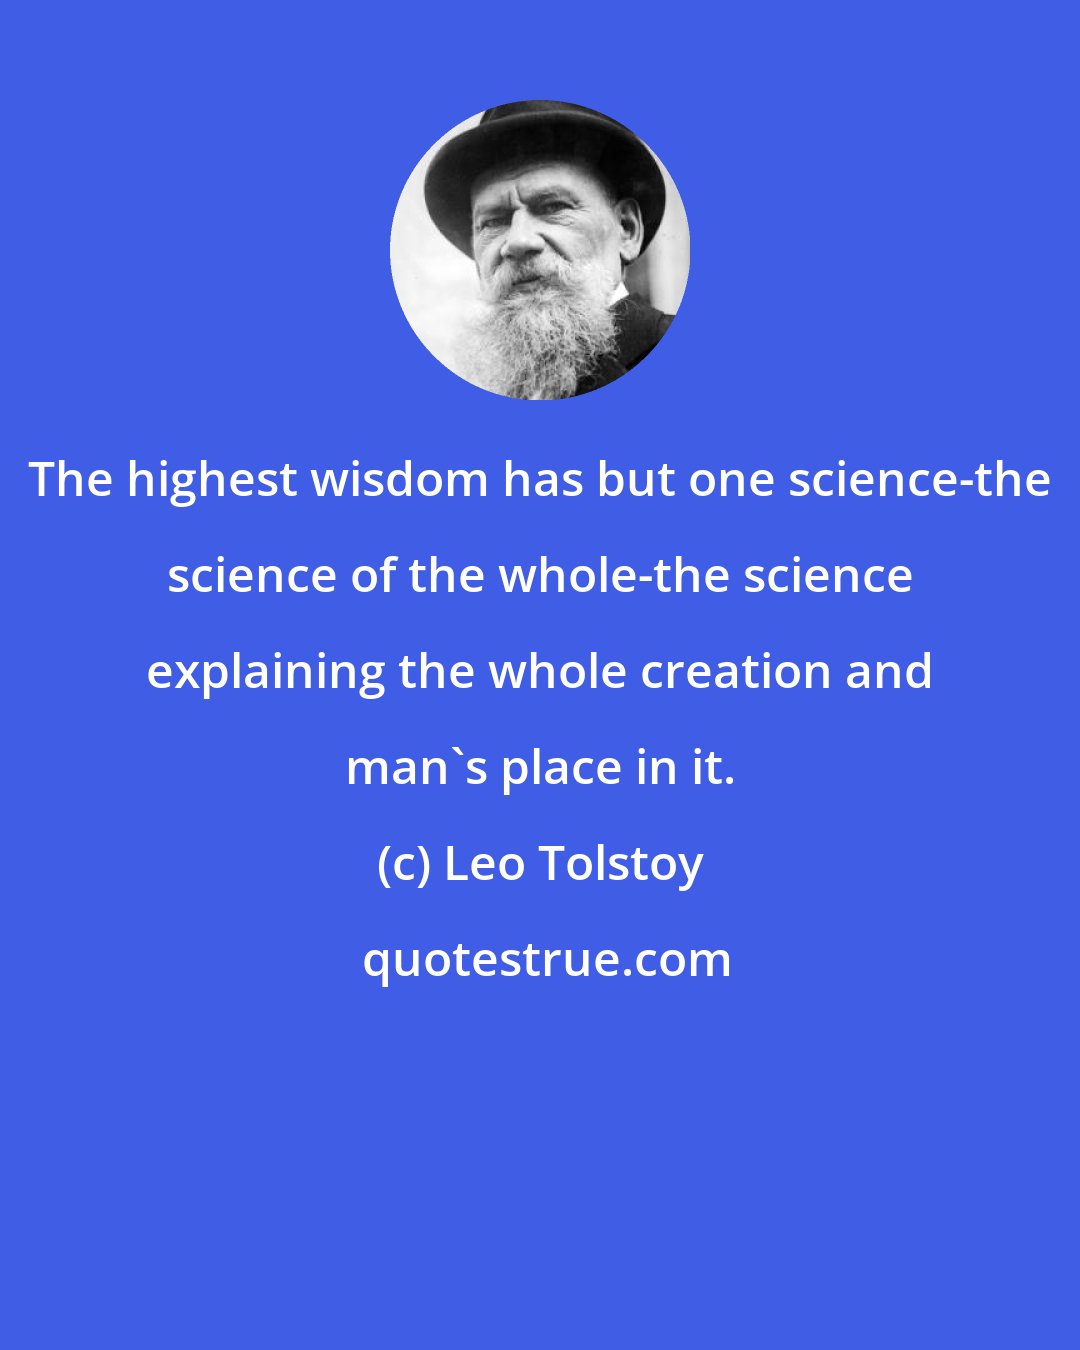 Leo Tolstoy: The highest wisdom has but one science-the science of the whole-the science explaining the whole creation and man's place in it.